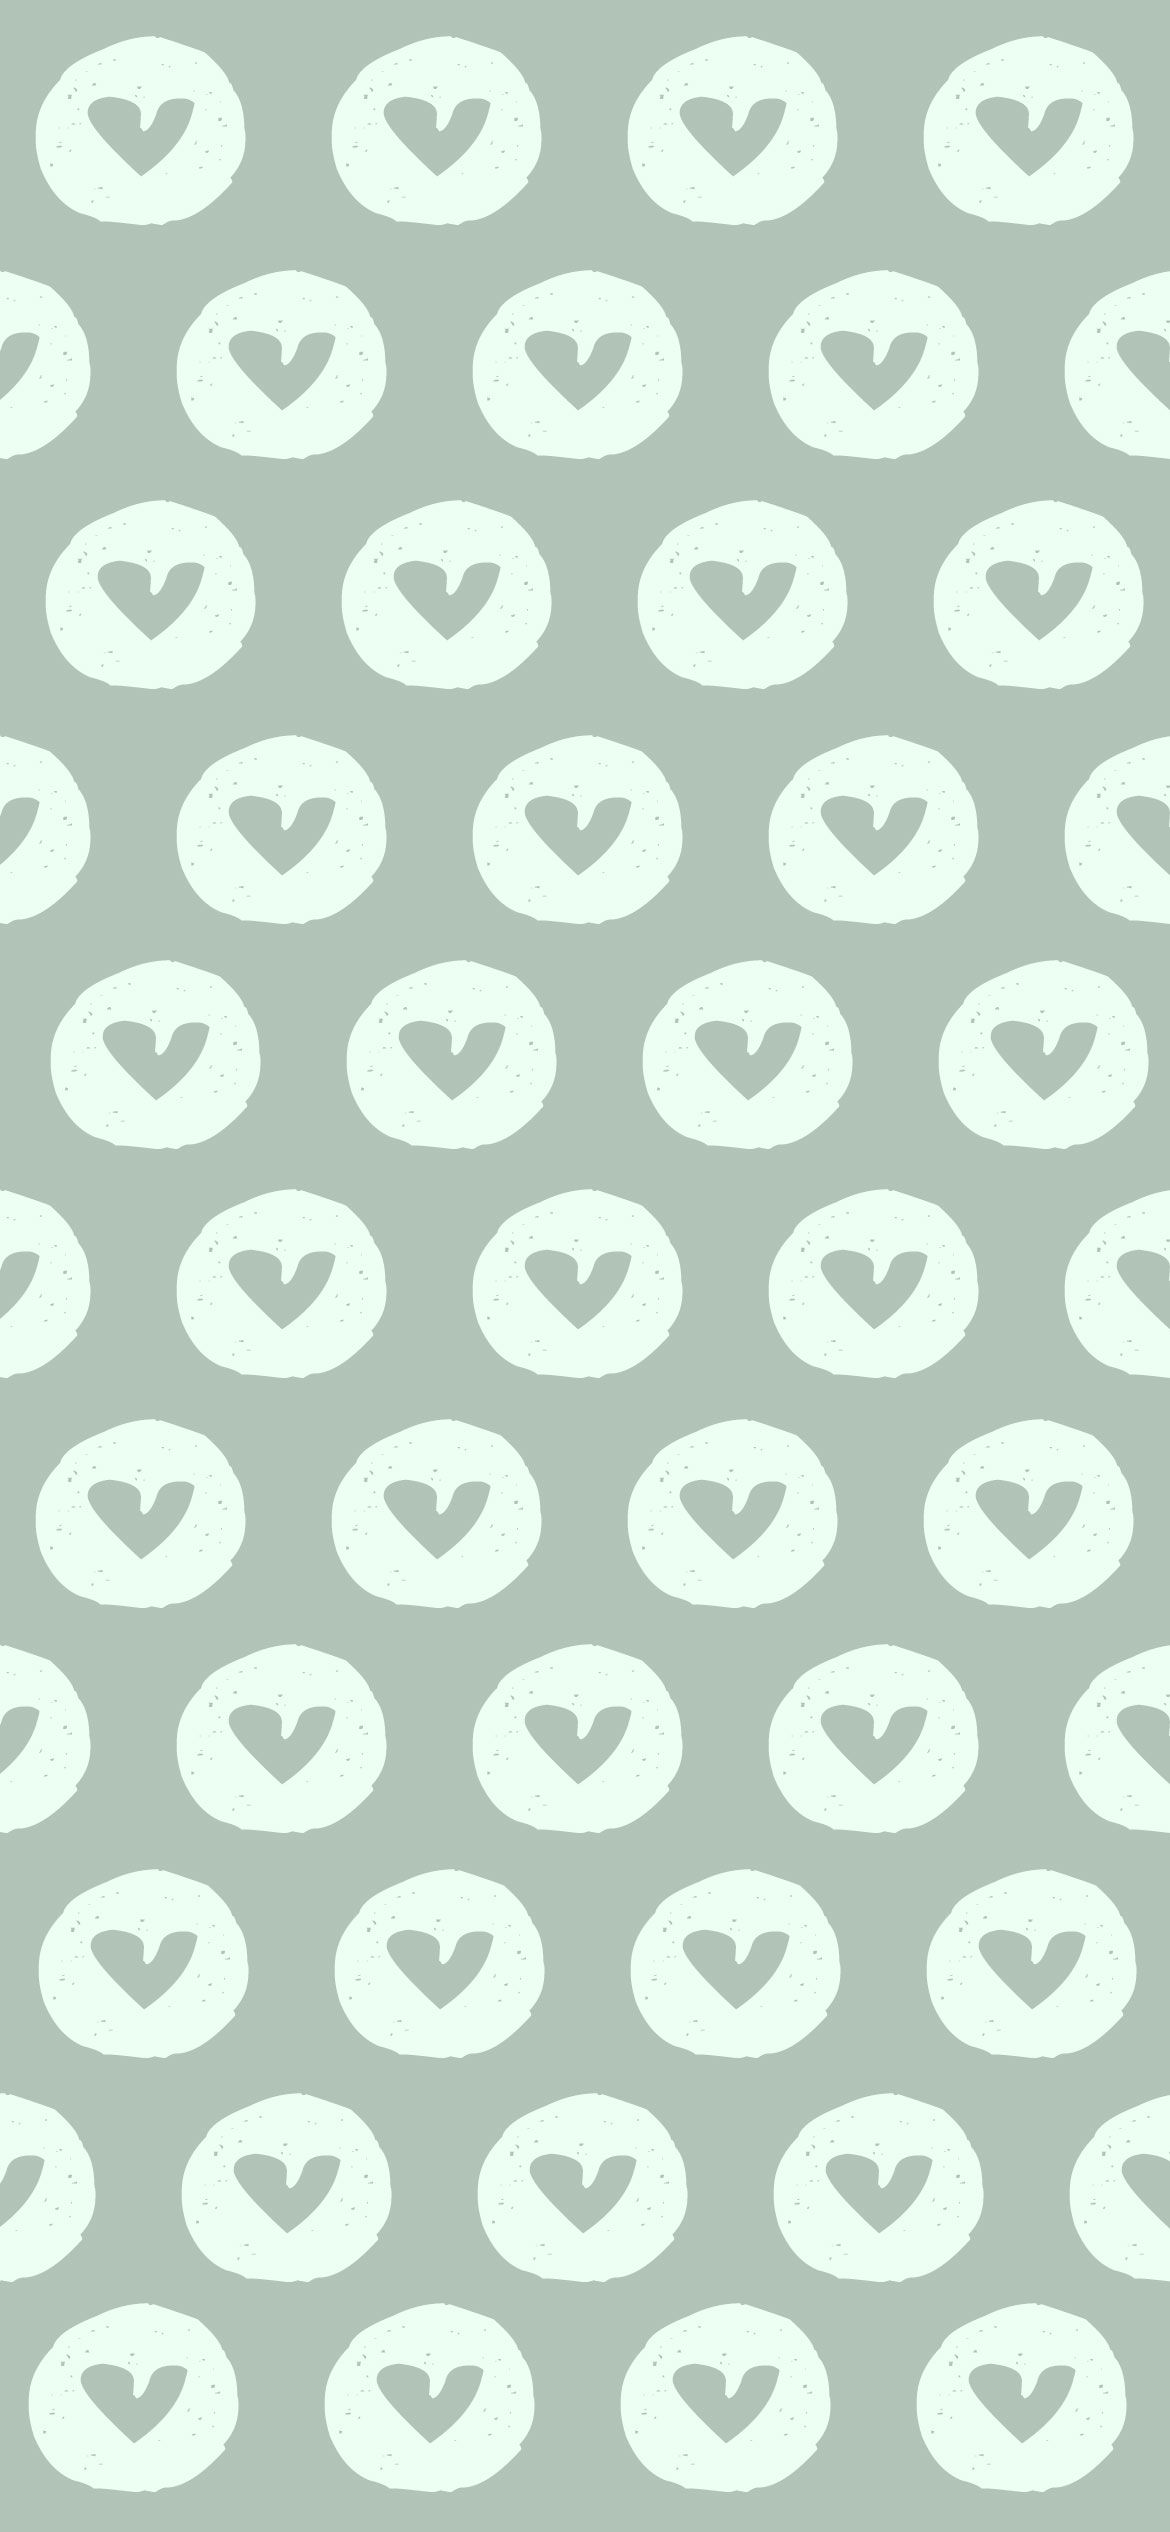 Green and white hearts pattern - Heart, minimalist, mint green, sage green, simple